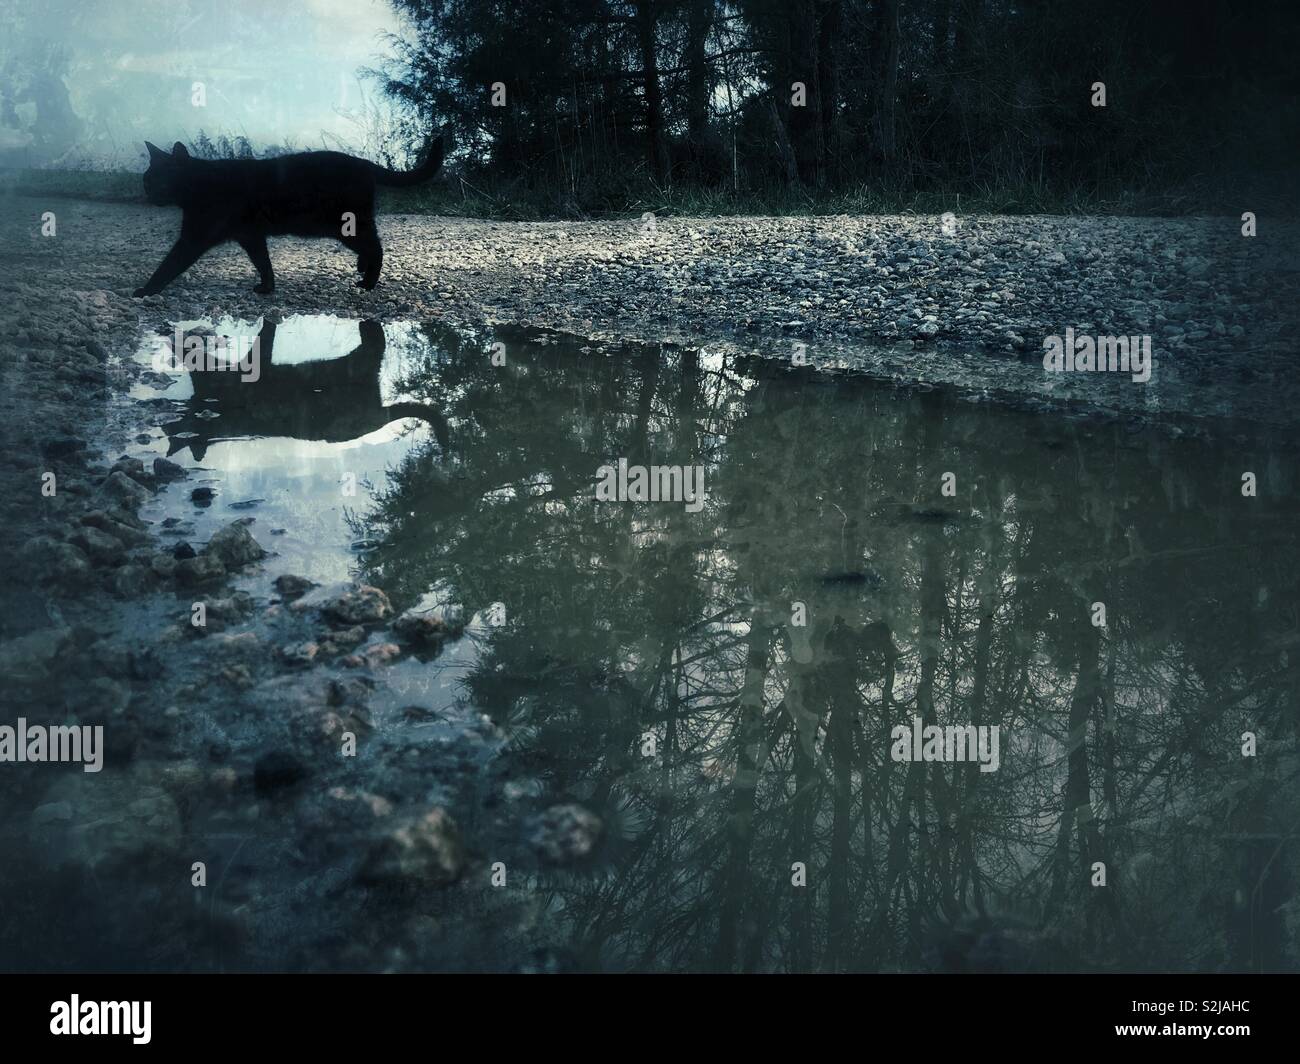 Grey/blue tones in overcast photo of sauntering cat reflected in driveway puddle Stock Photo